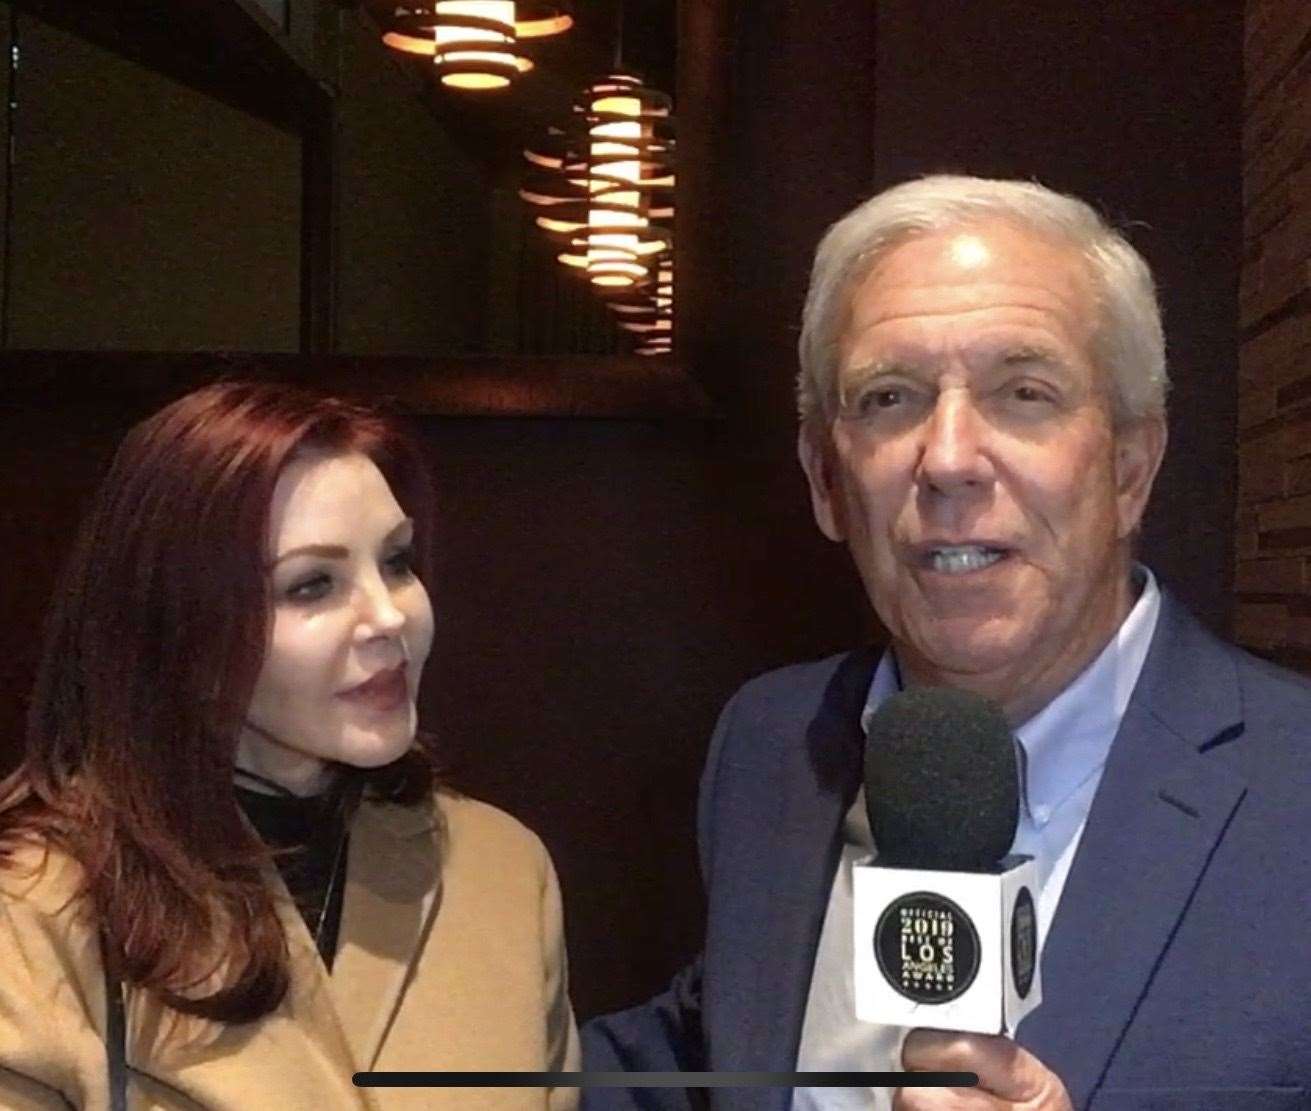 Pat interviewing Priscilla Presley for his show having spent most of his career behind the camera.